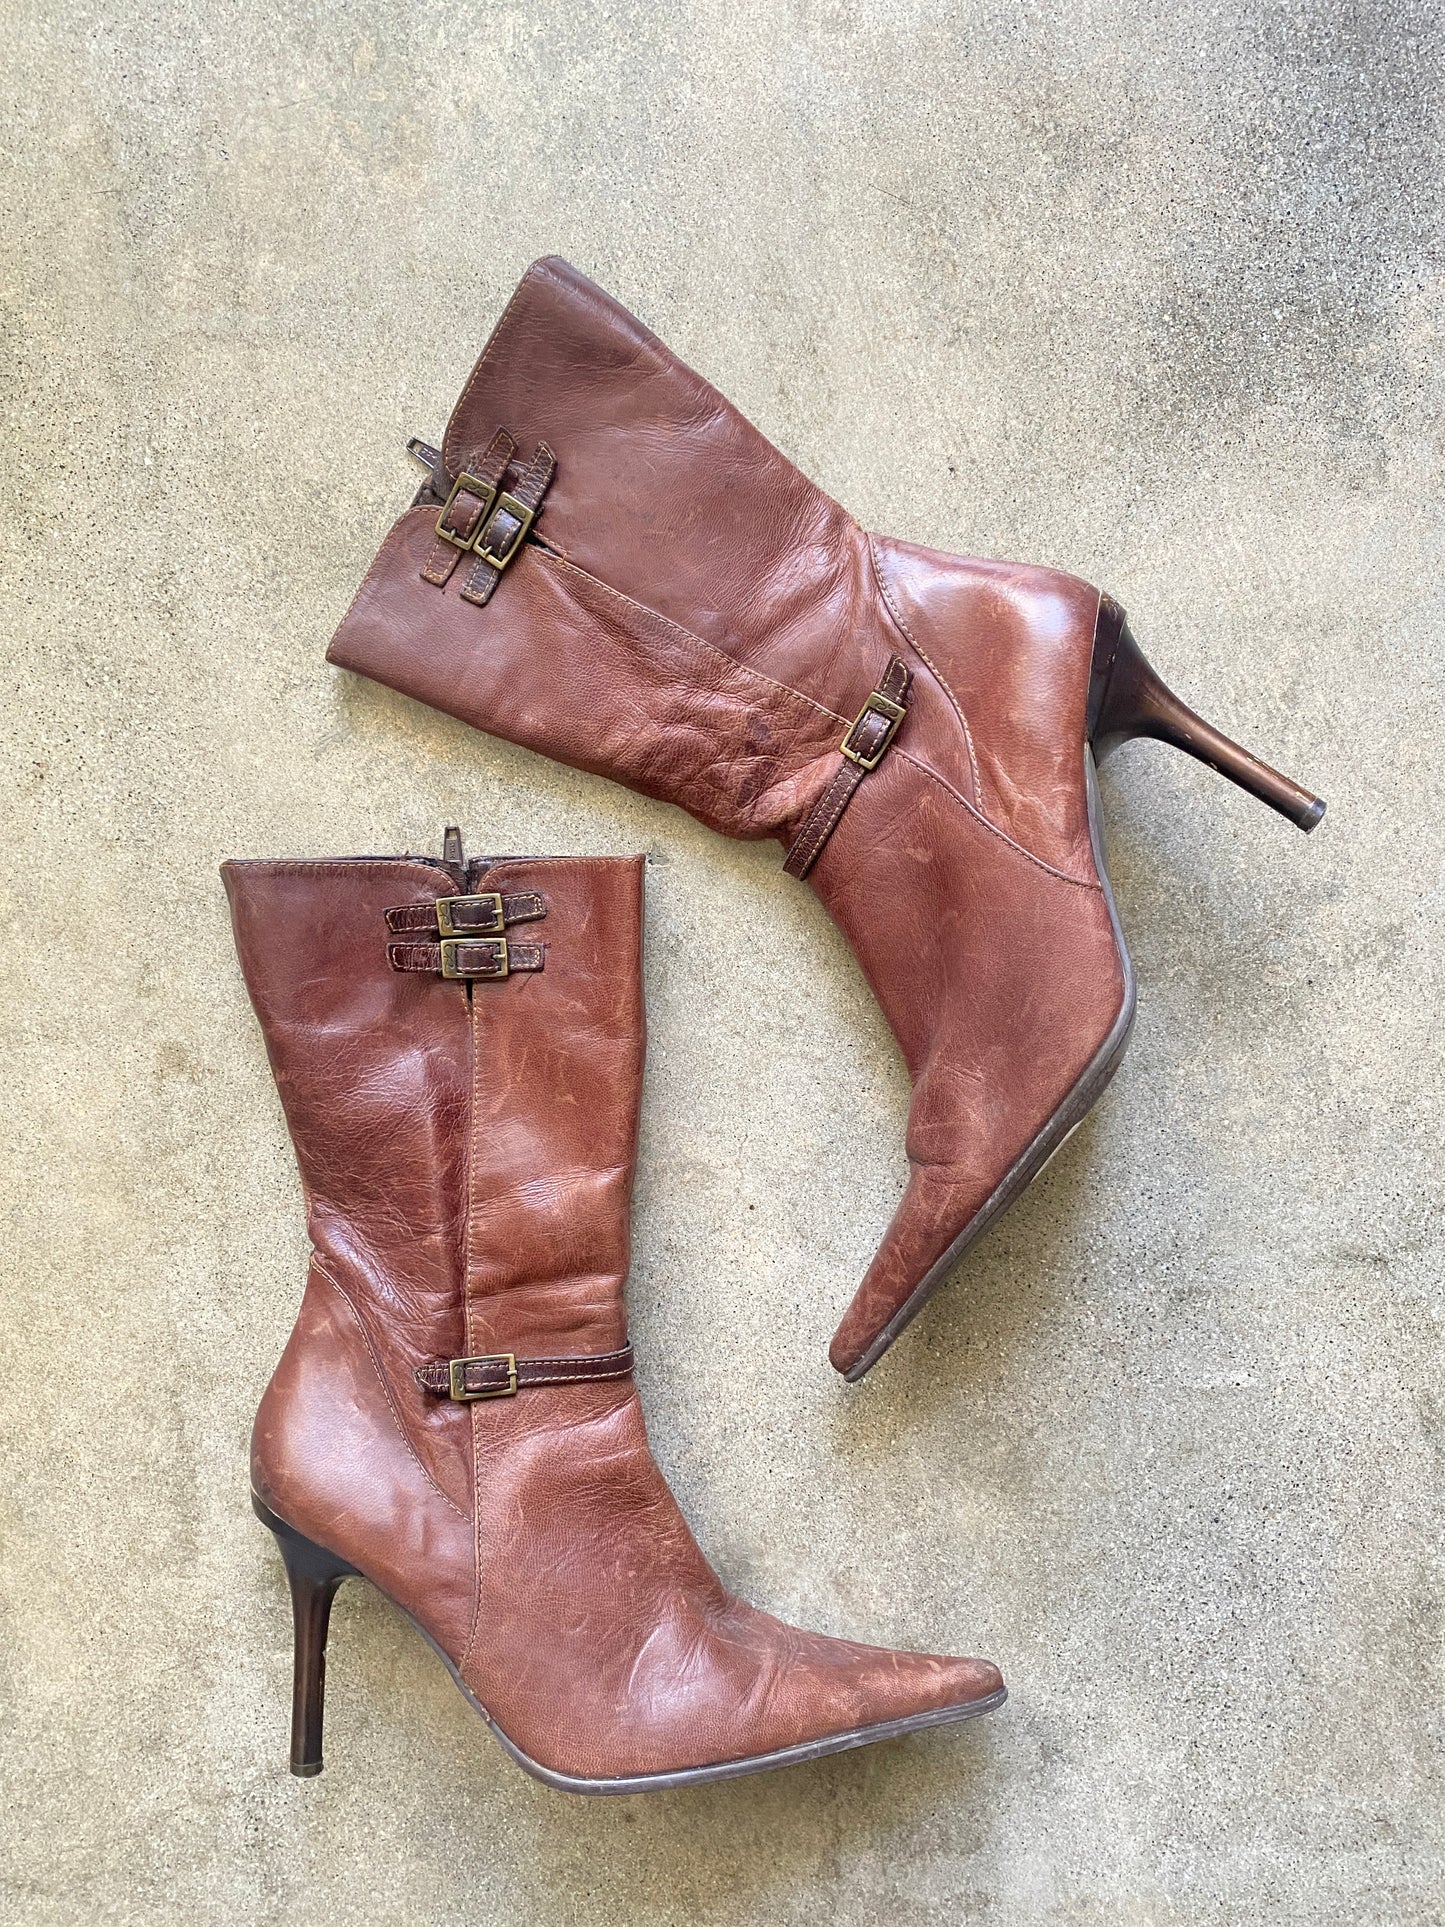 00's Distressed Tan Point Toe Booties